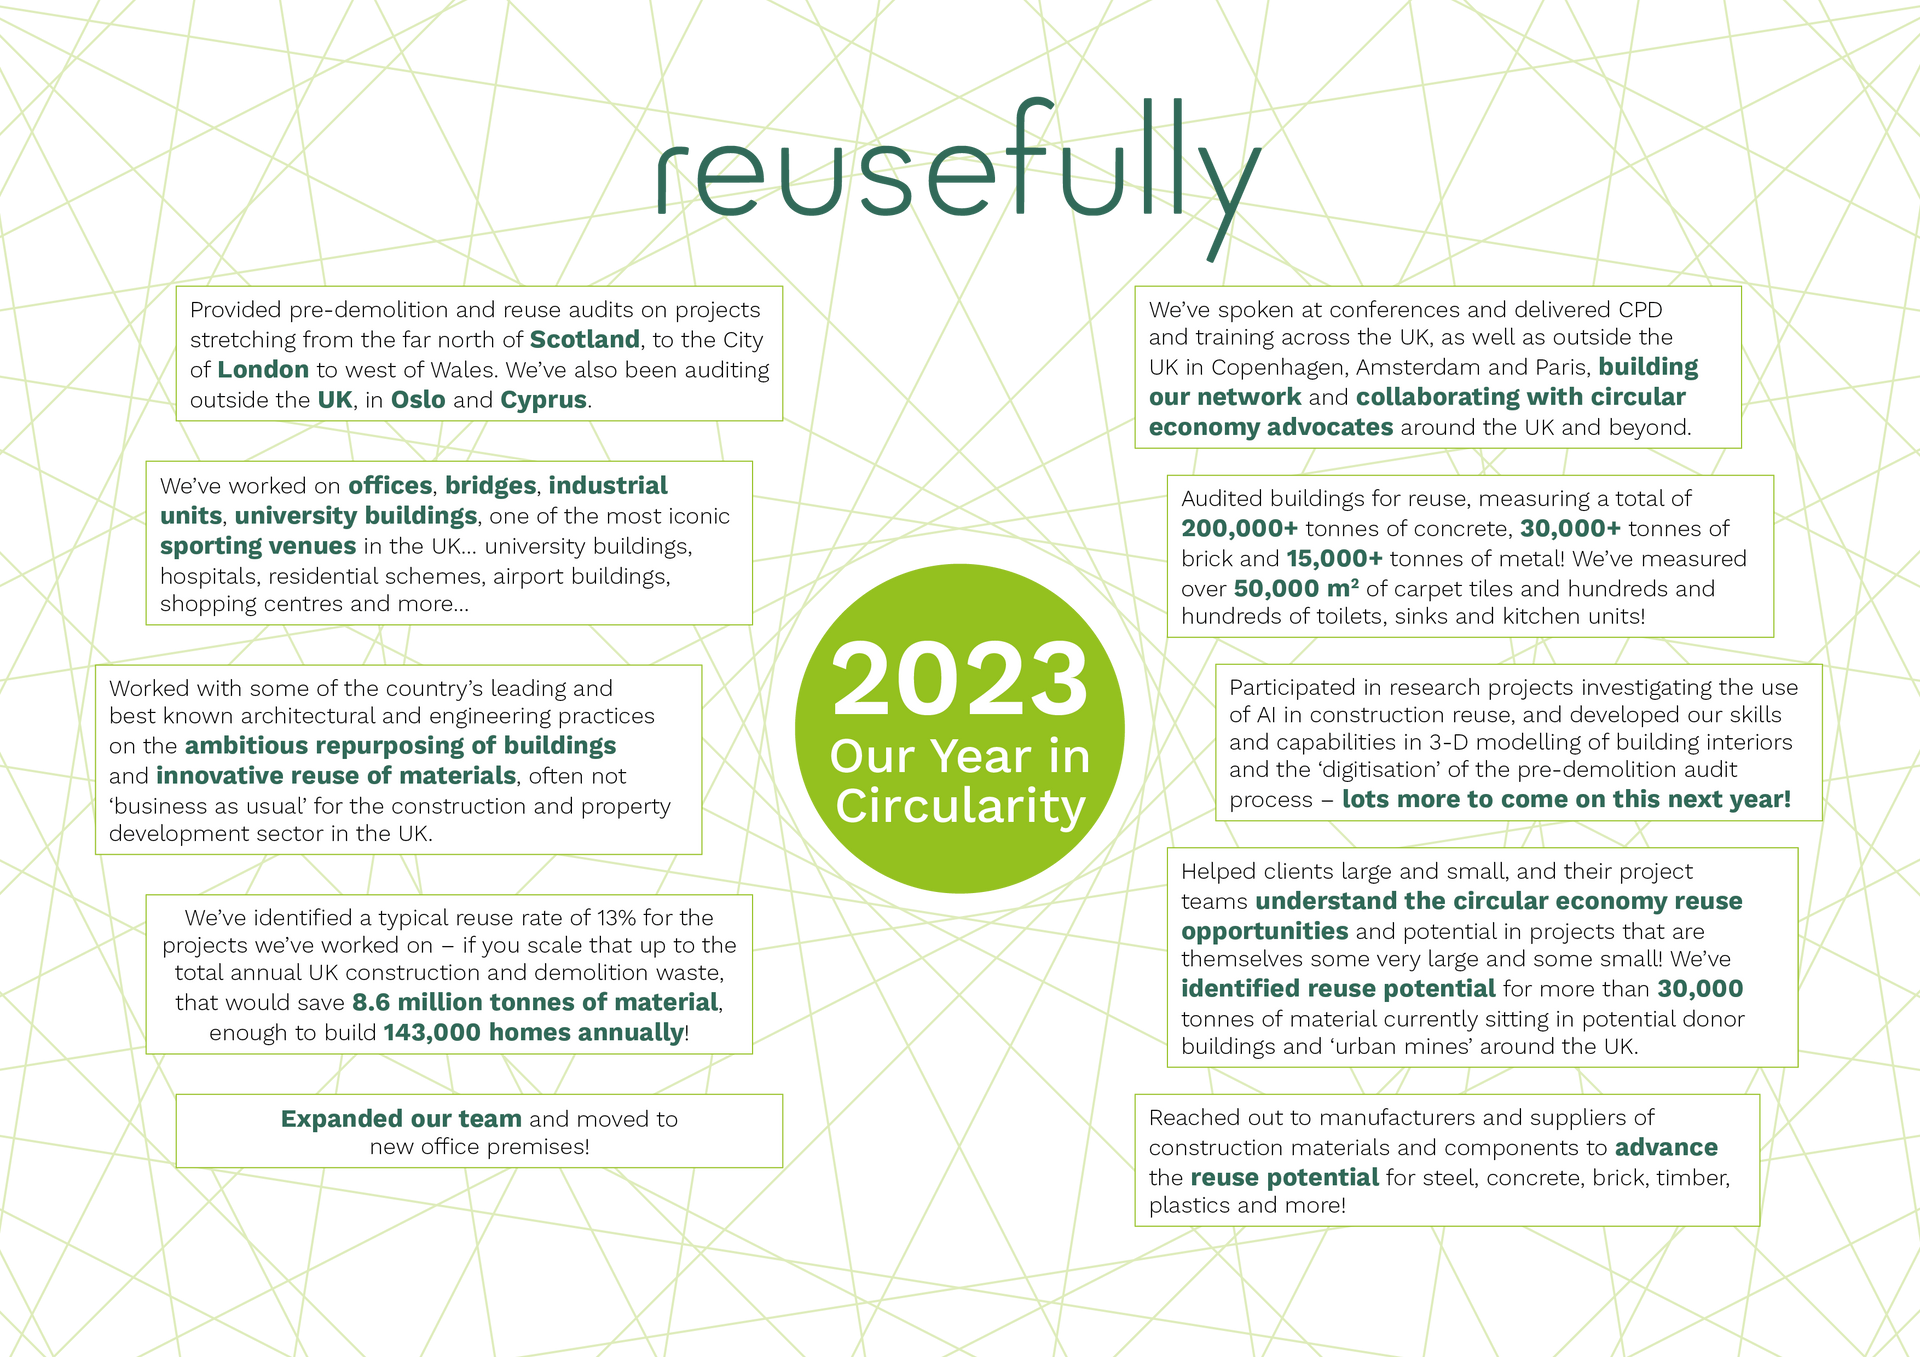 2023 Our Year in Circularity. Pre-demolition and reuse audits, offices, bridges, industrial units, university buildings, repurposing of buildings, reuse of materials. 